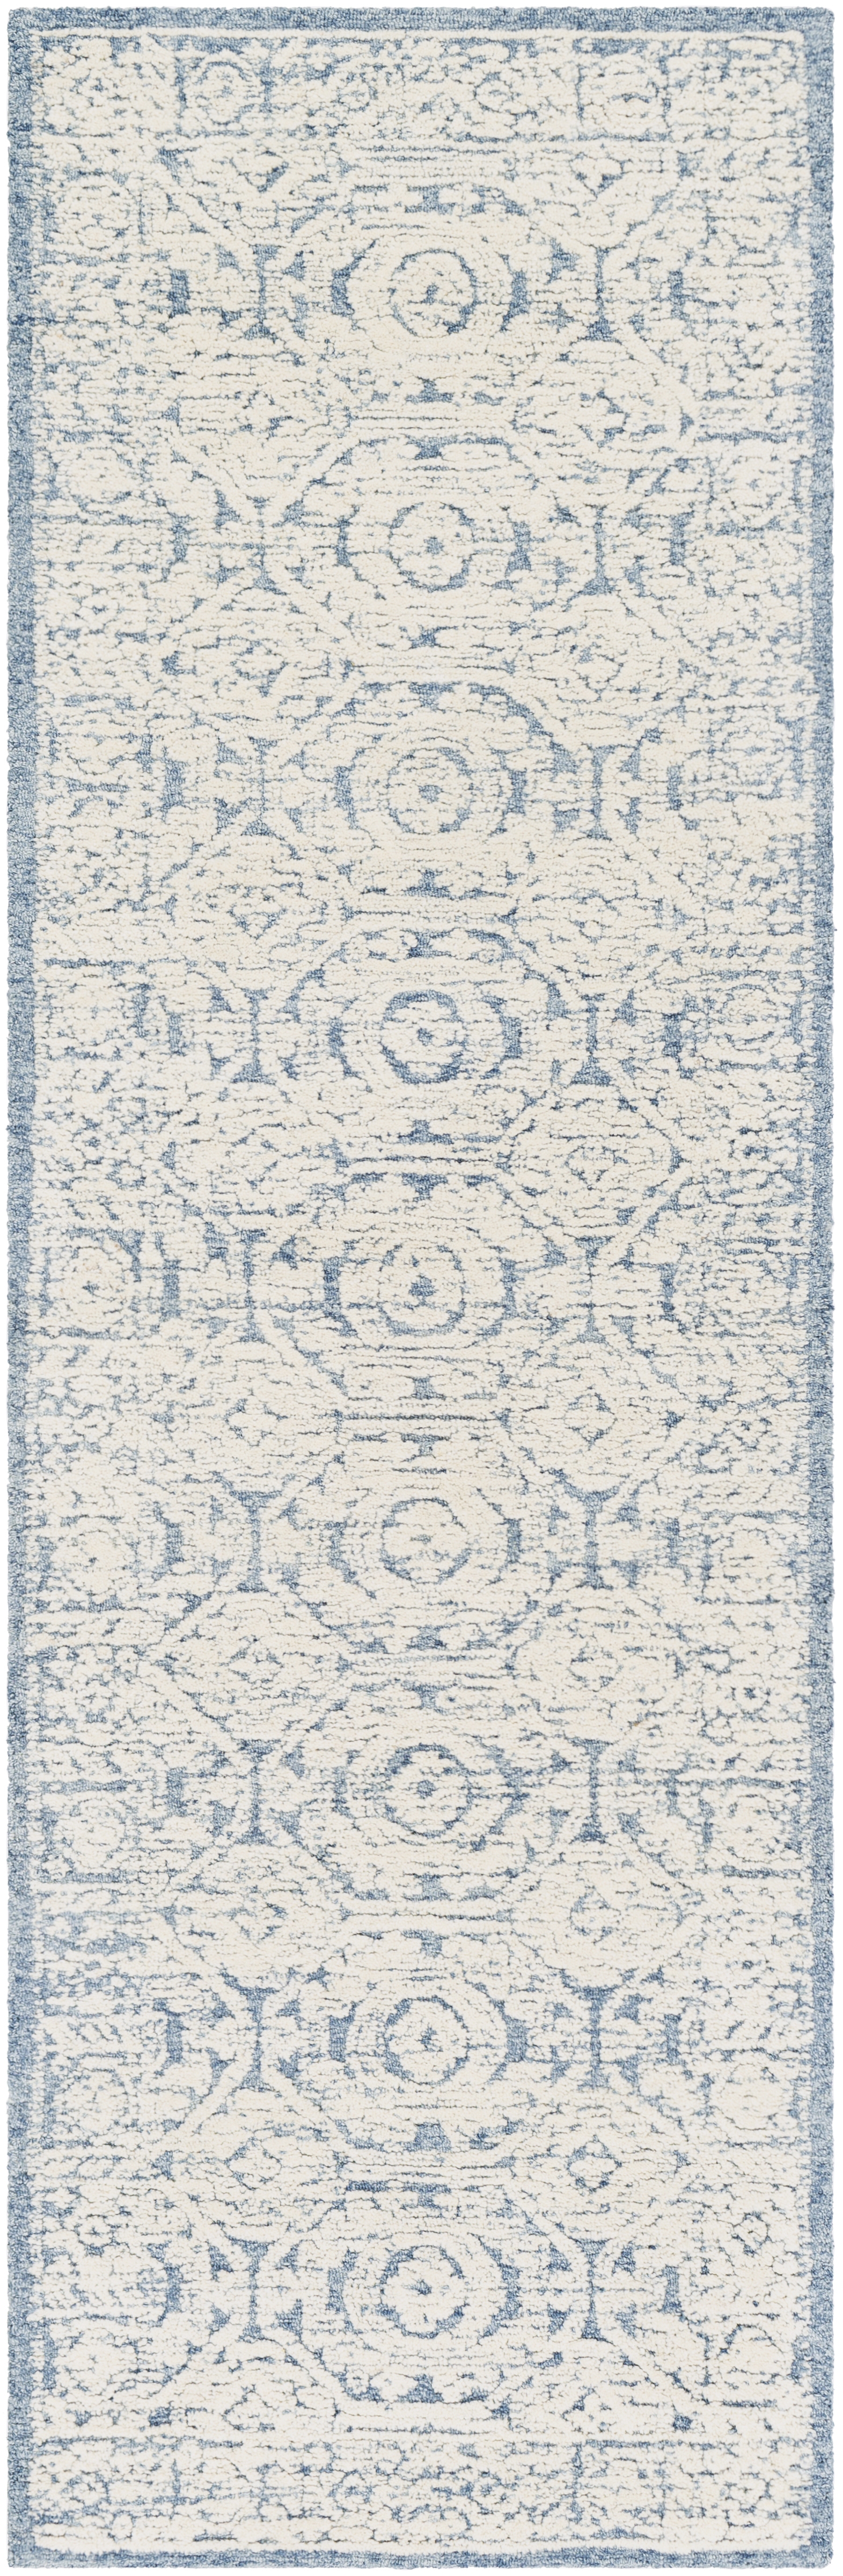 Louvre Rug, 2'6" x 8' - Image 0